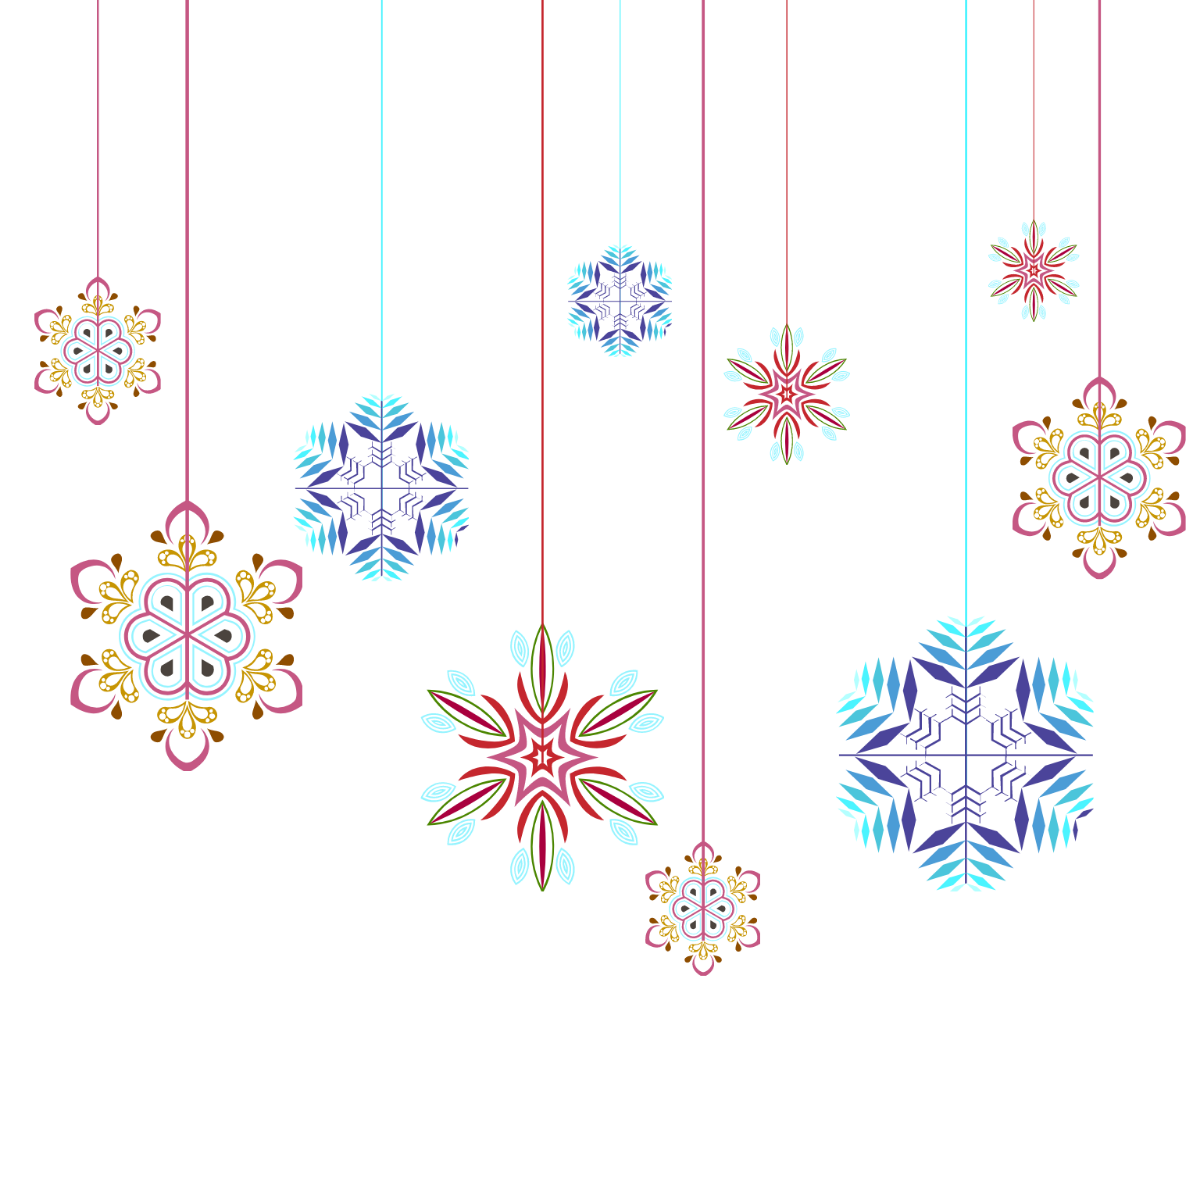 Free Snowflake Ornament Vector Template